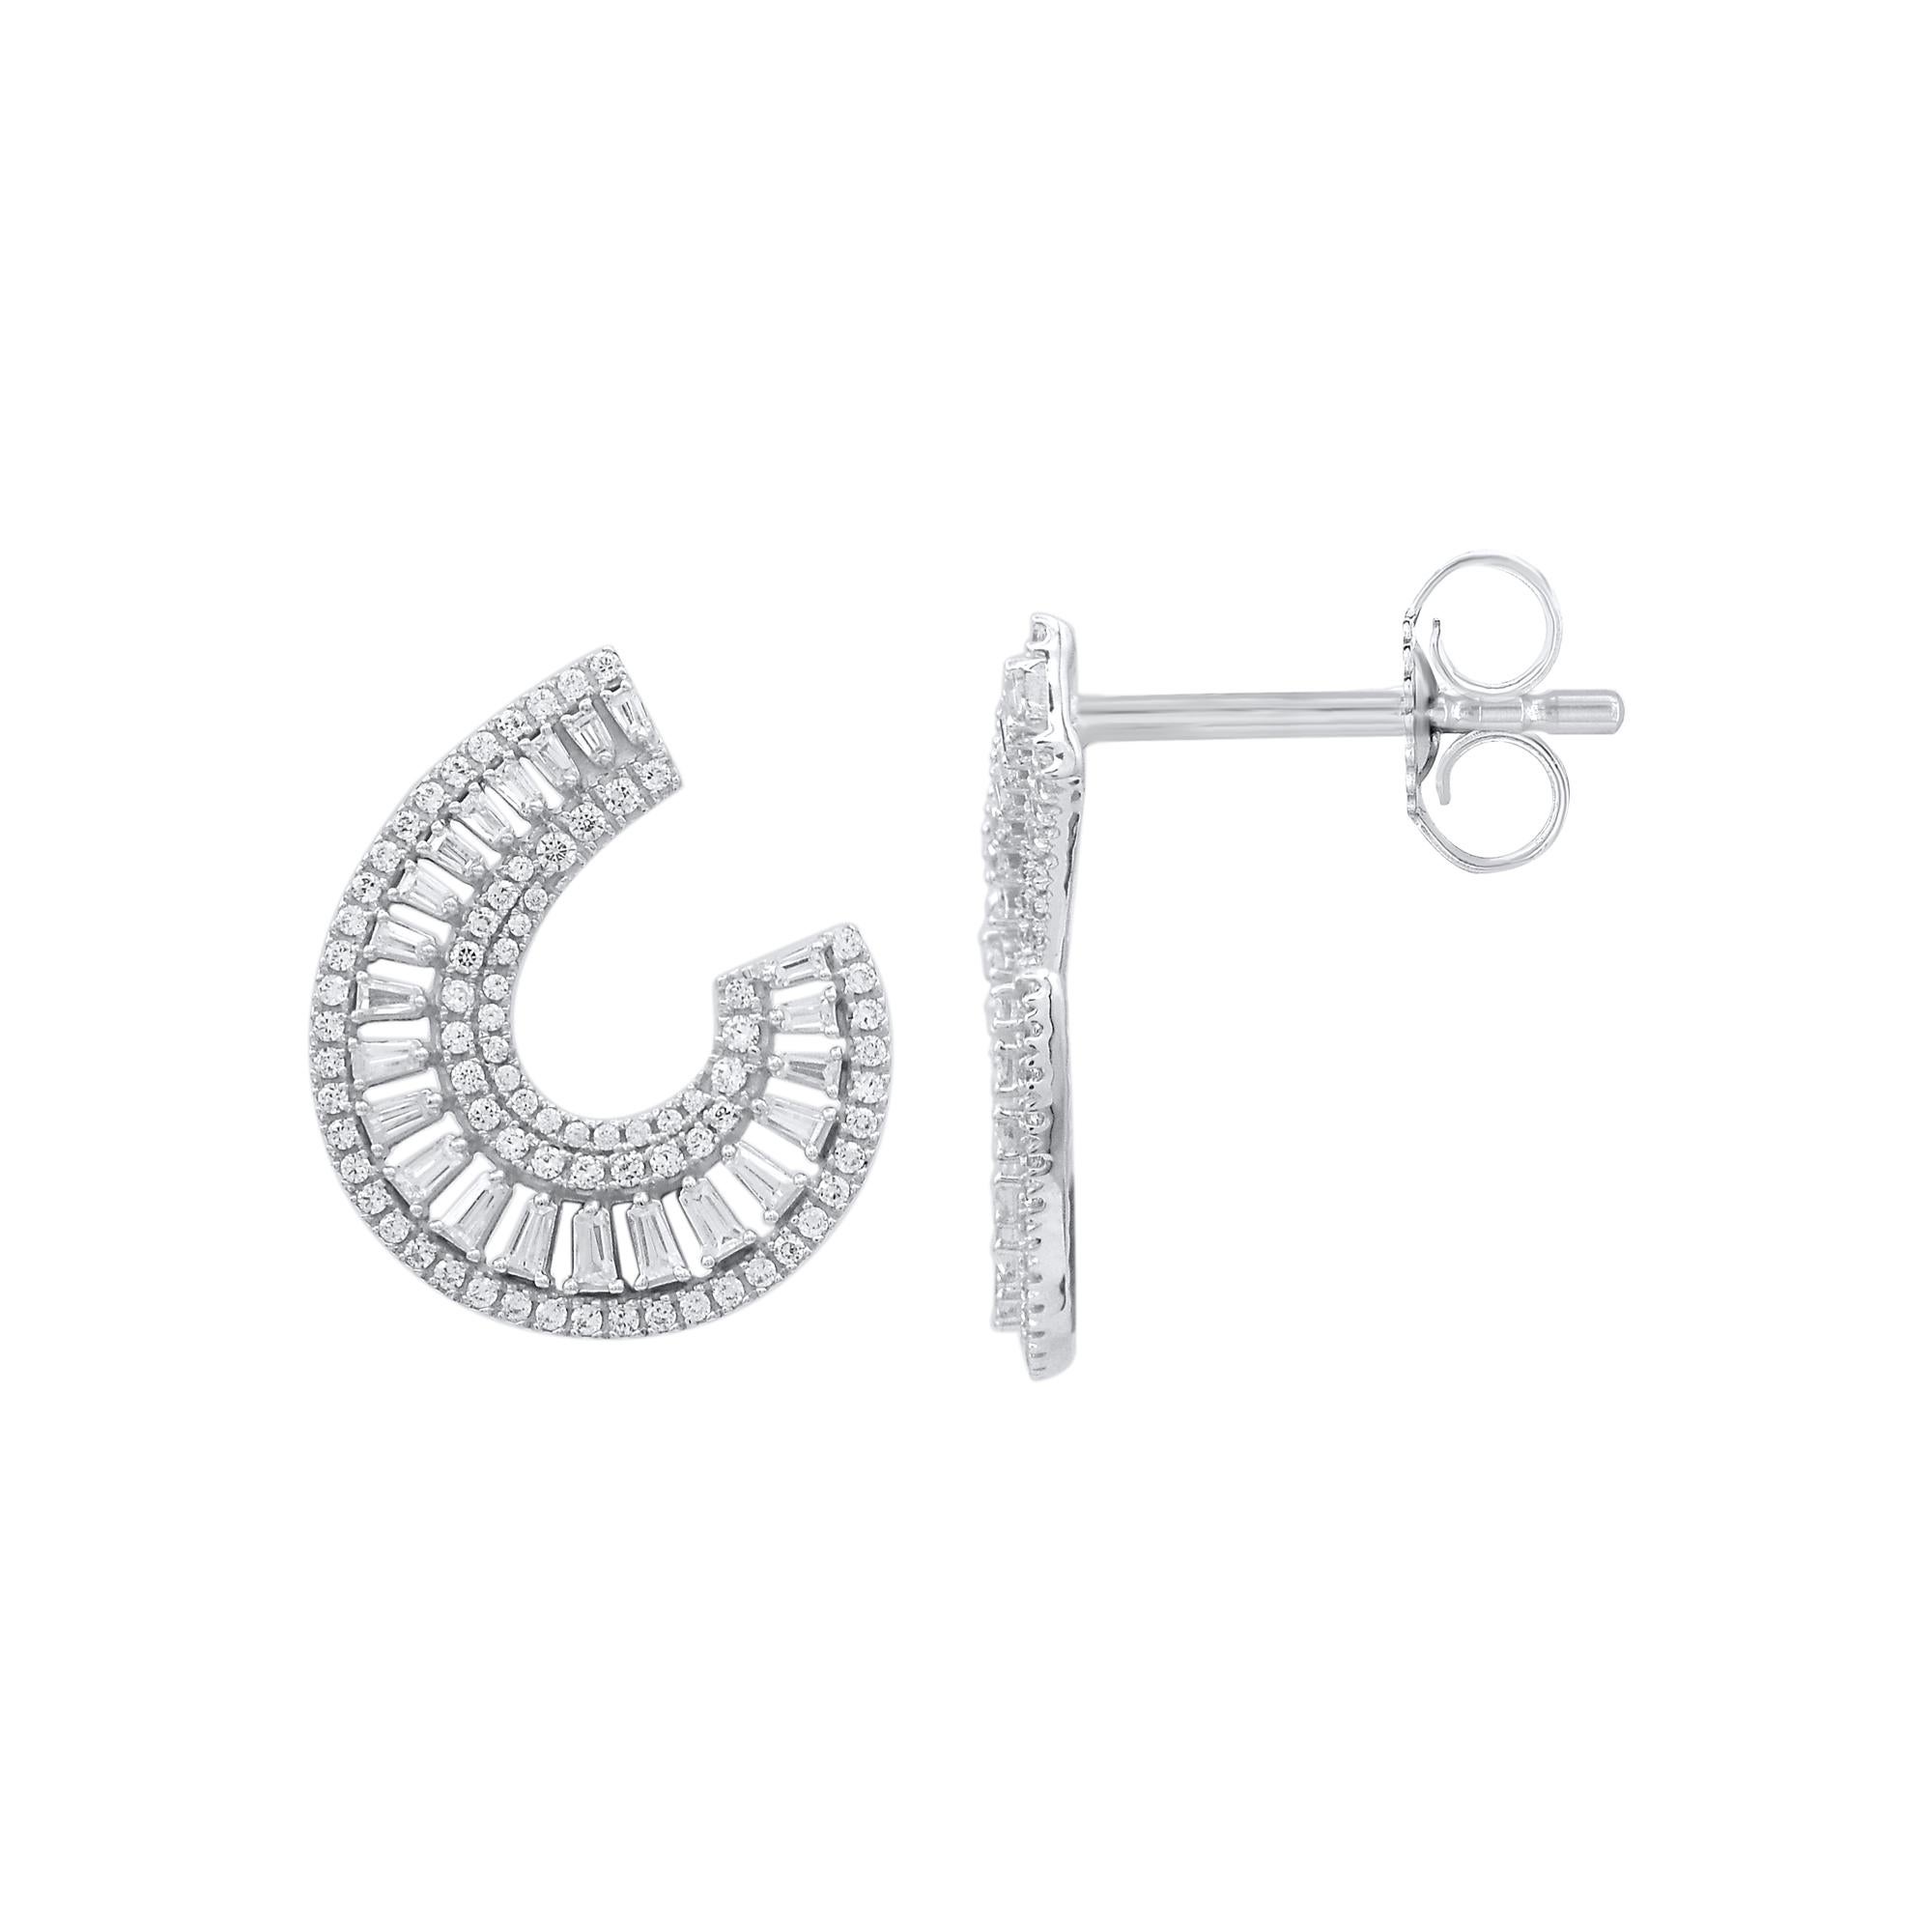 You'll adore the petite touch of shimmer these designer stud earrings add to your attire. Beautifully hand-crafted by our inhouse experts in 14 karat white gold and embellished with 198 single cut, brilliant cut round & baguette diamonds set in